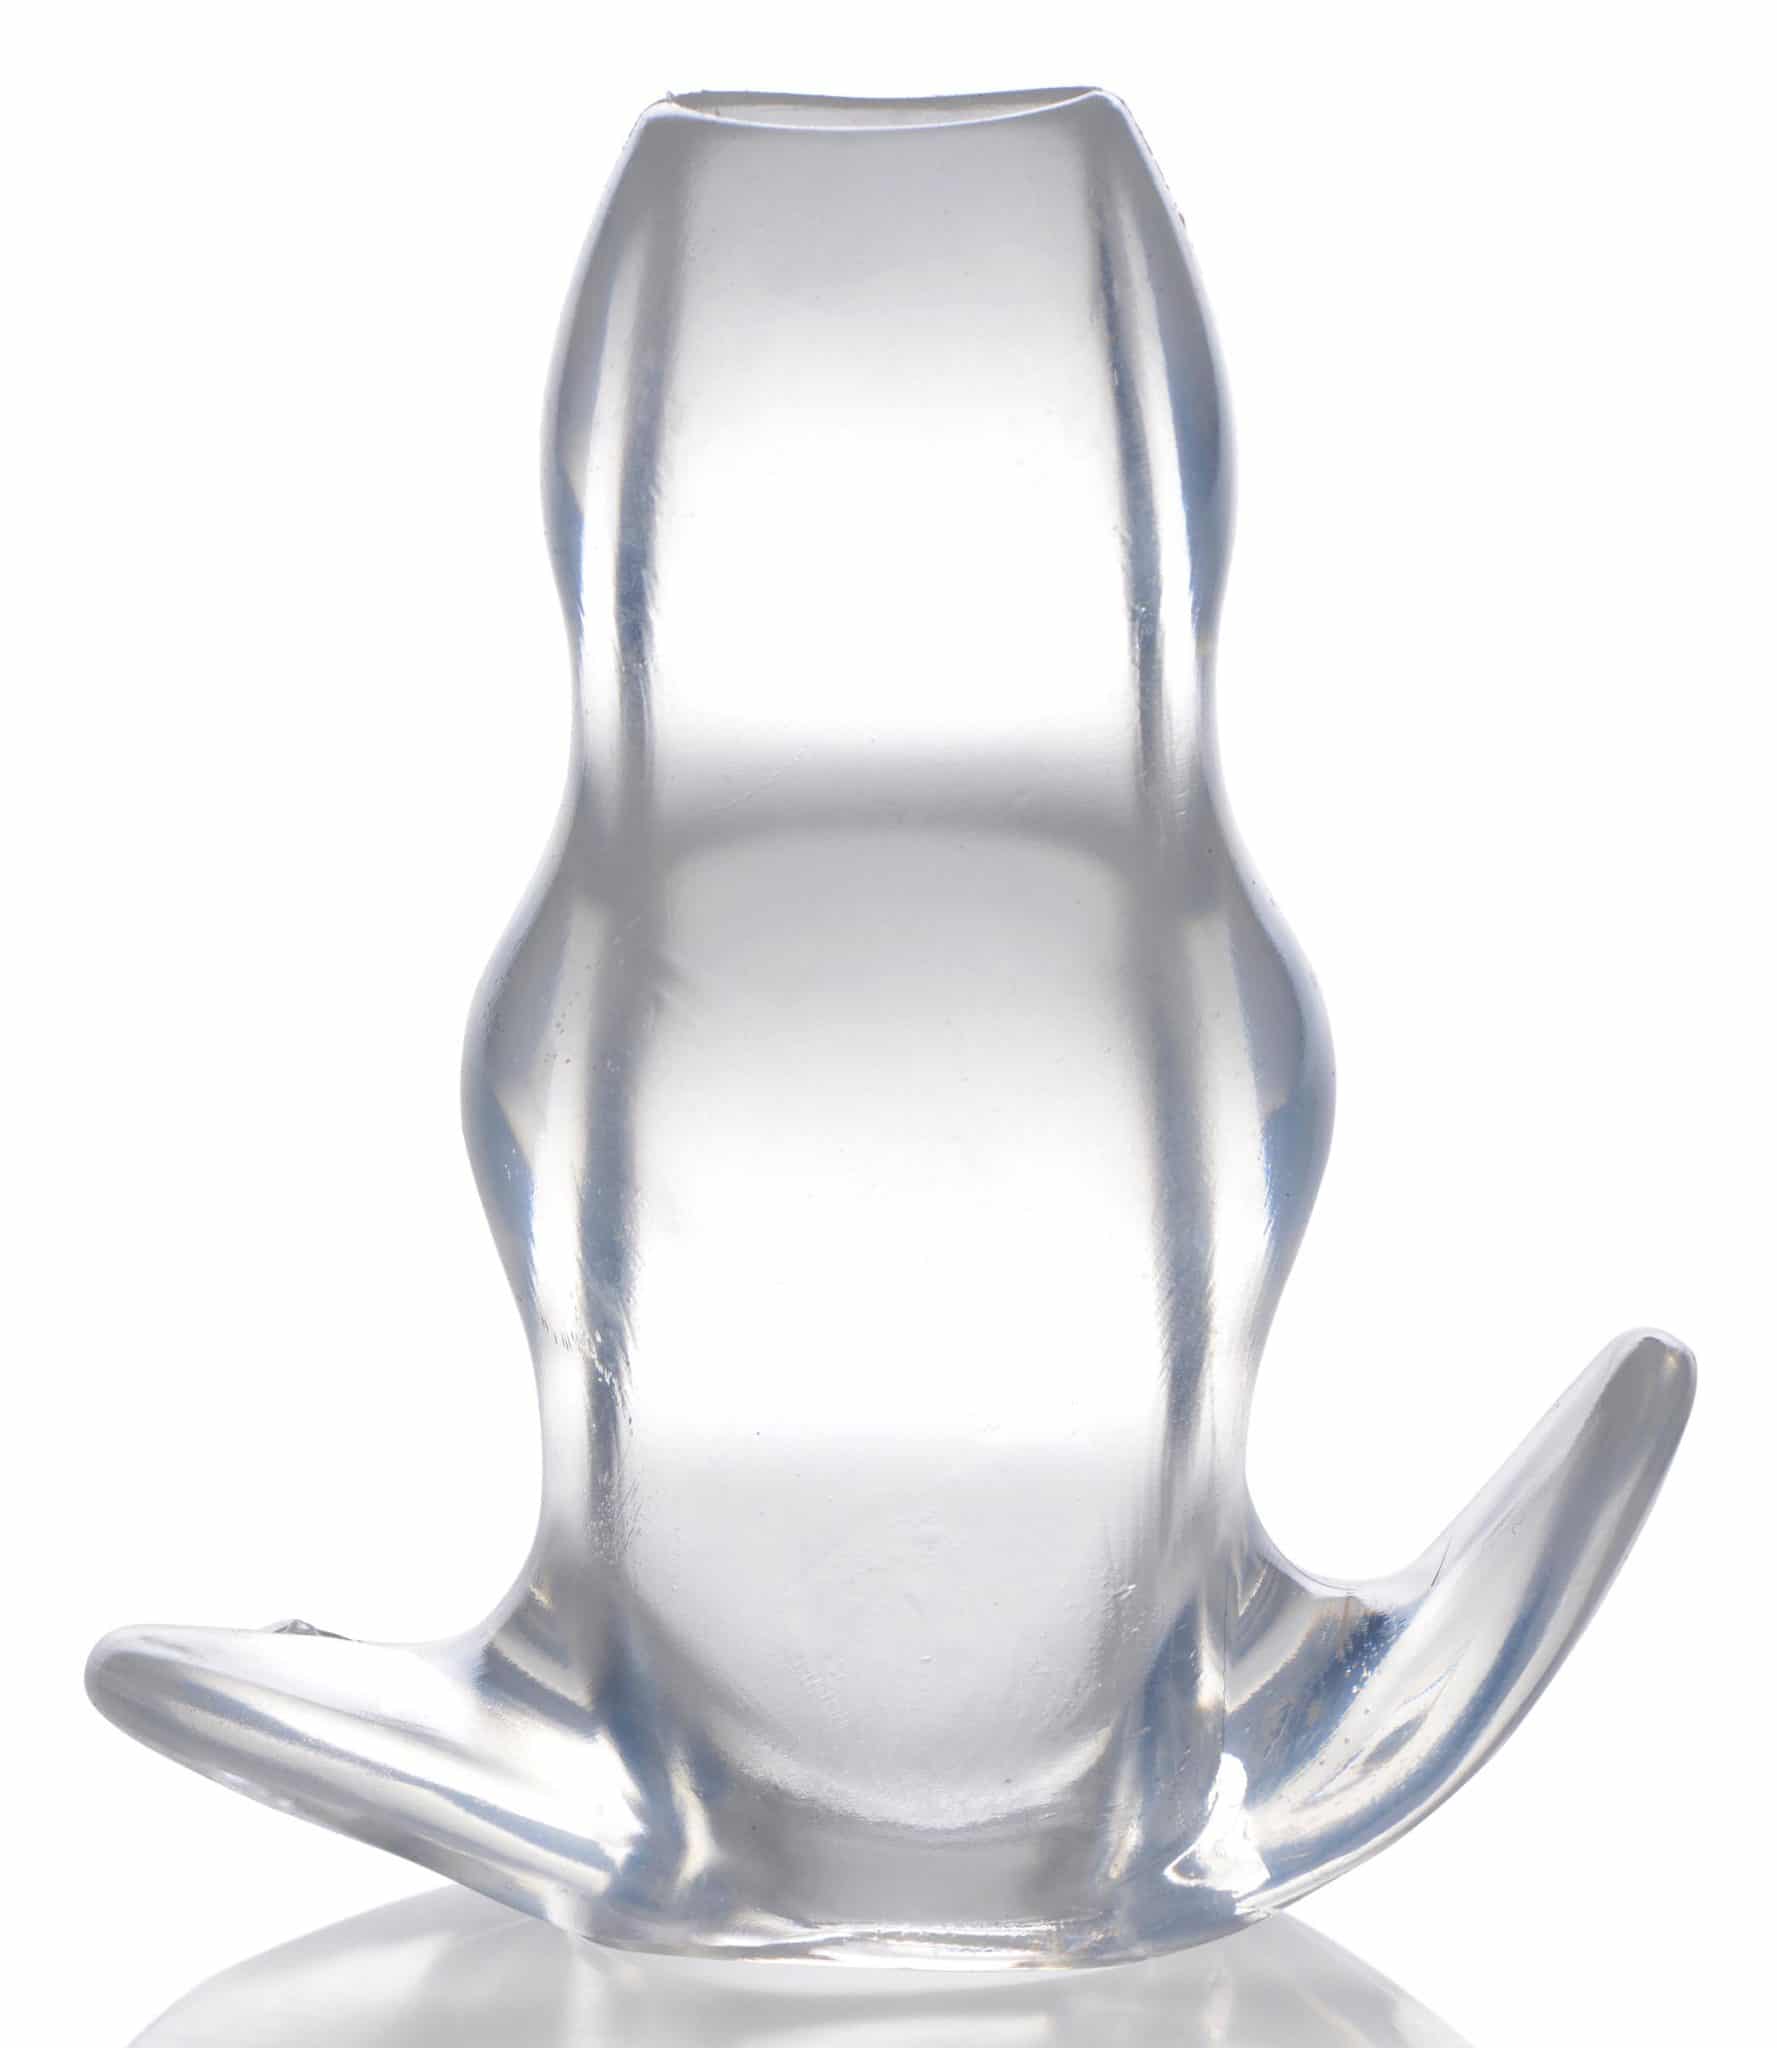 Clear View Hollow Anal Plug – Large